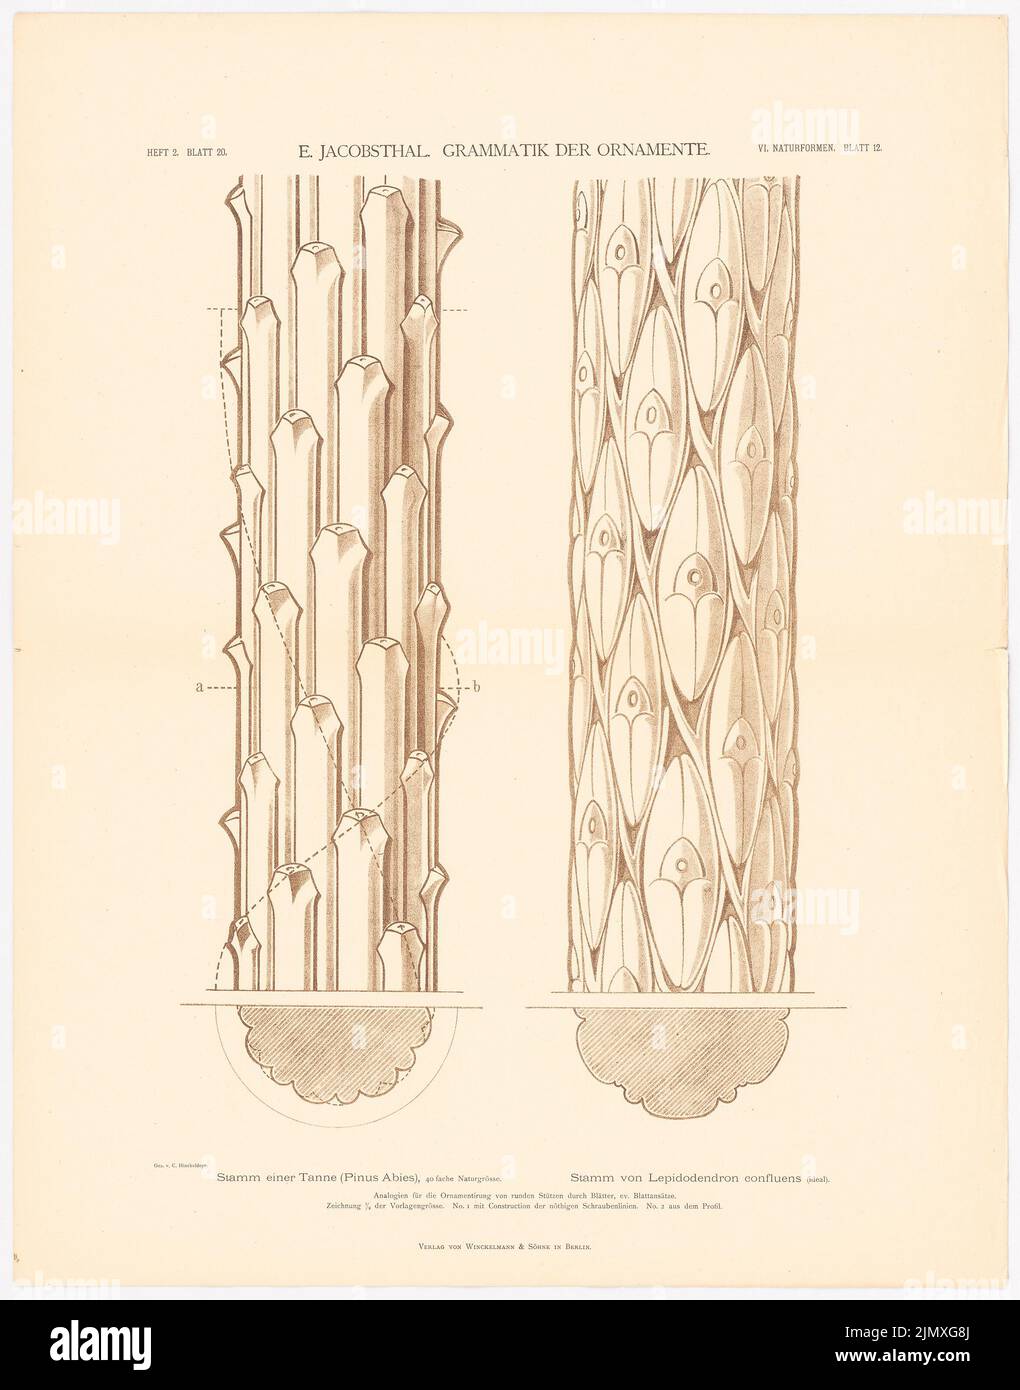 Jacobsthal Johann Eduard (1839-1902), grammar of the ornaments (without date): trunk of a fir (Pinus Abies), tribe of lepidodendrum confluens, issue 2nd sheet 20 .. lithograph on paper, 72 x 56.5 cm (incl. . Scan edges) Jacobsthal Johann Eduard  (1839-1902): Grammatik der Ornamente Stock Photo